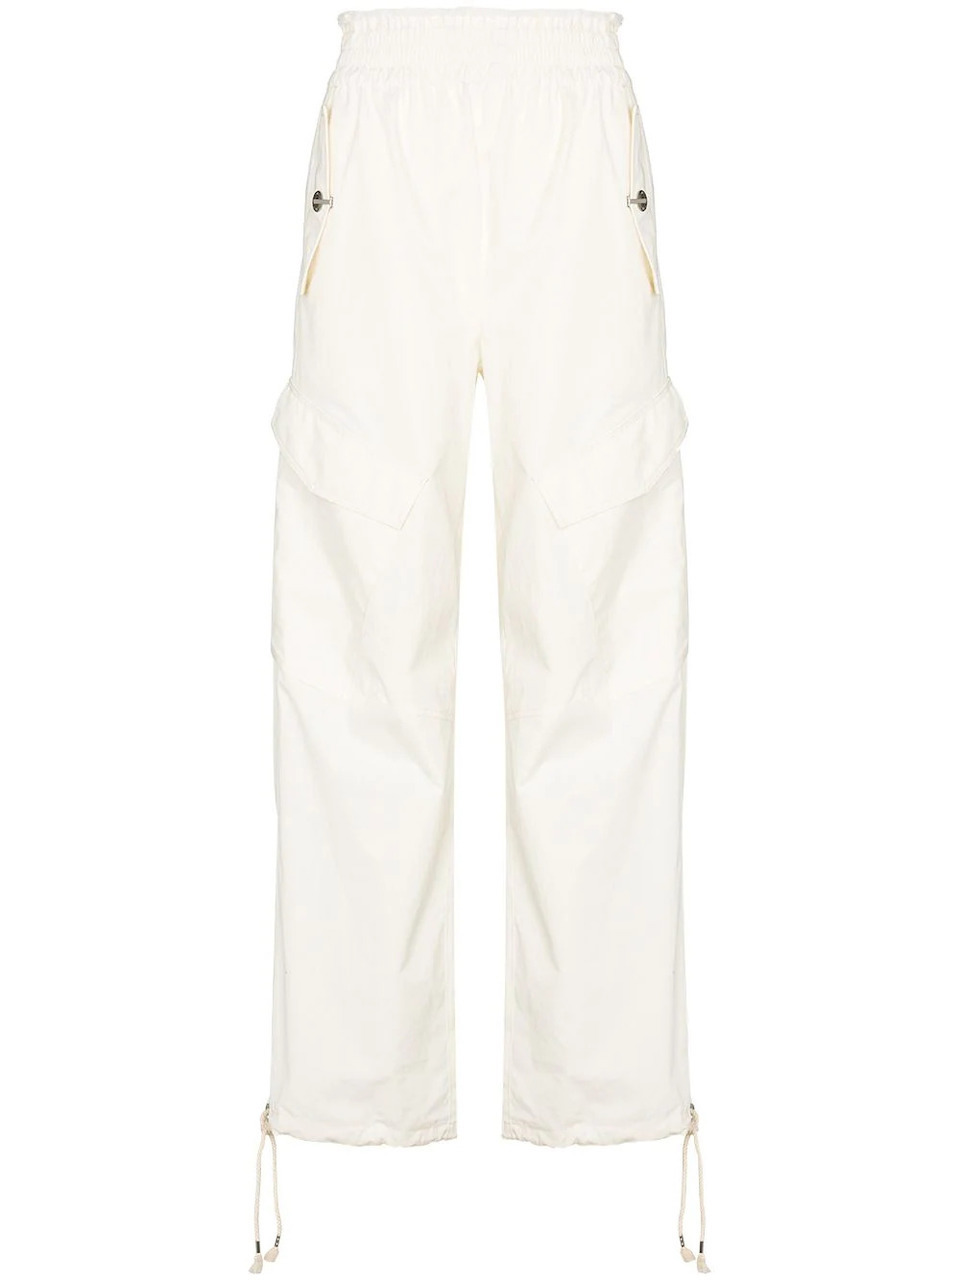 10 Cargo Pants to Shop Now from Our Favorite Designers